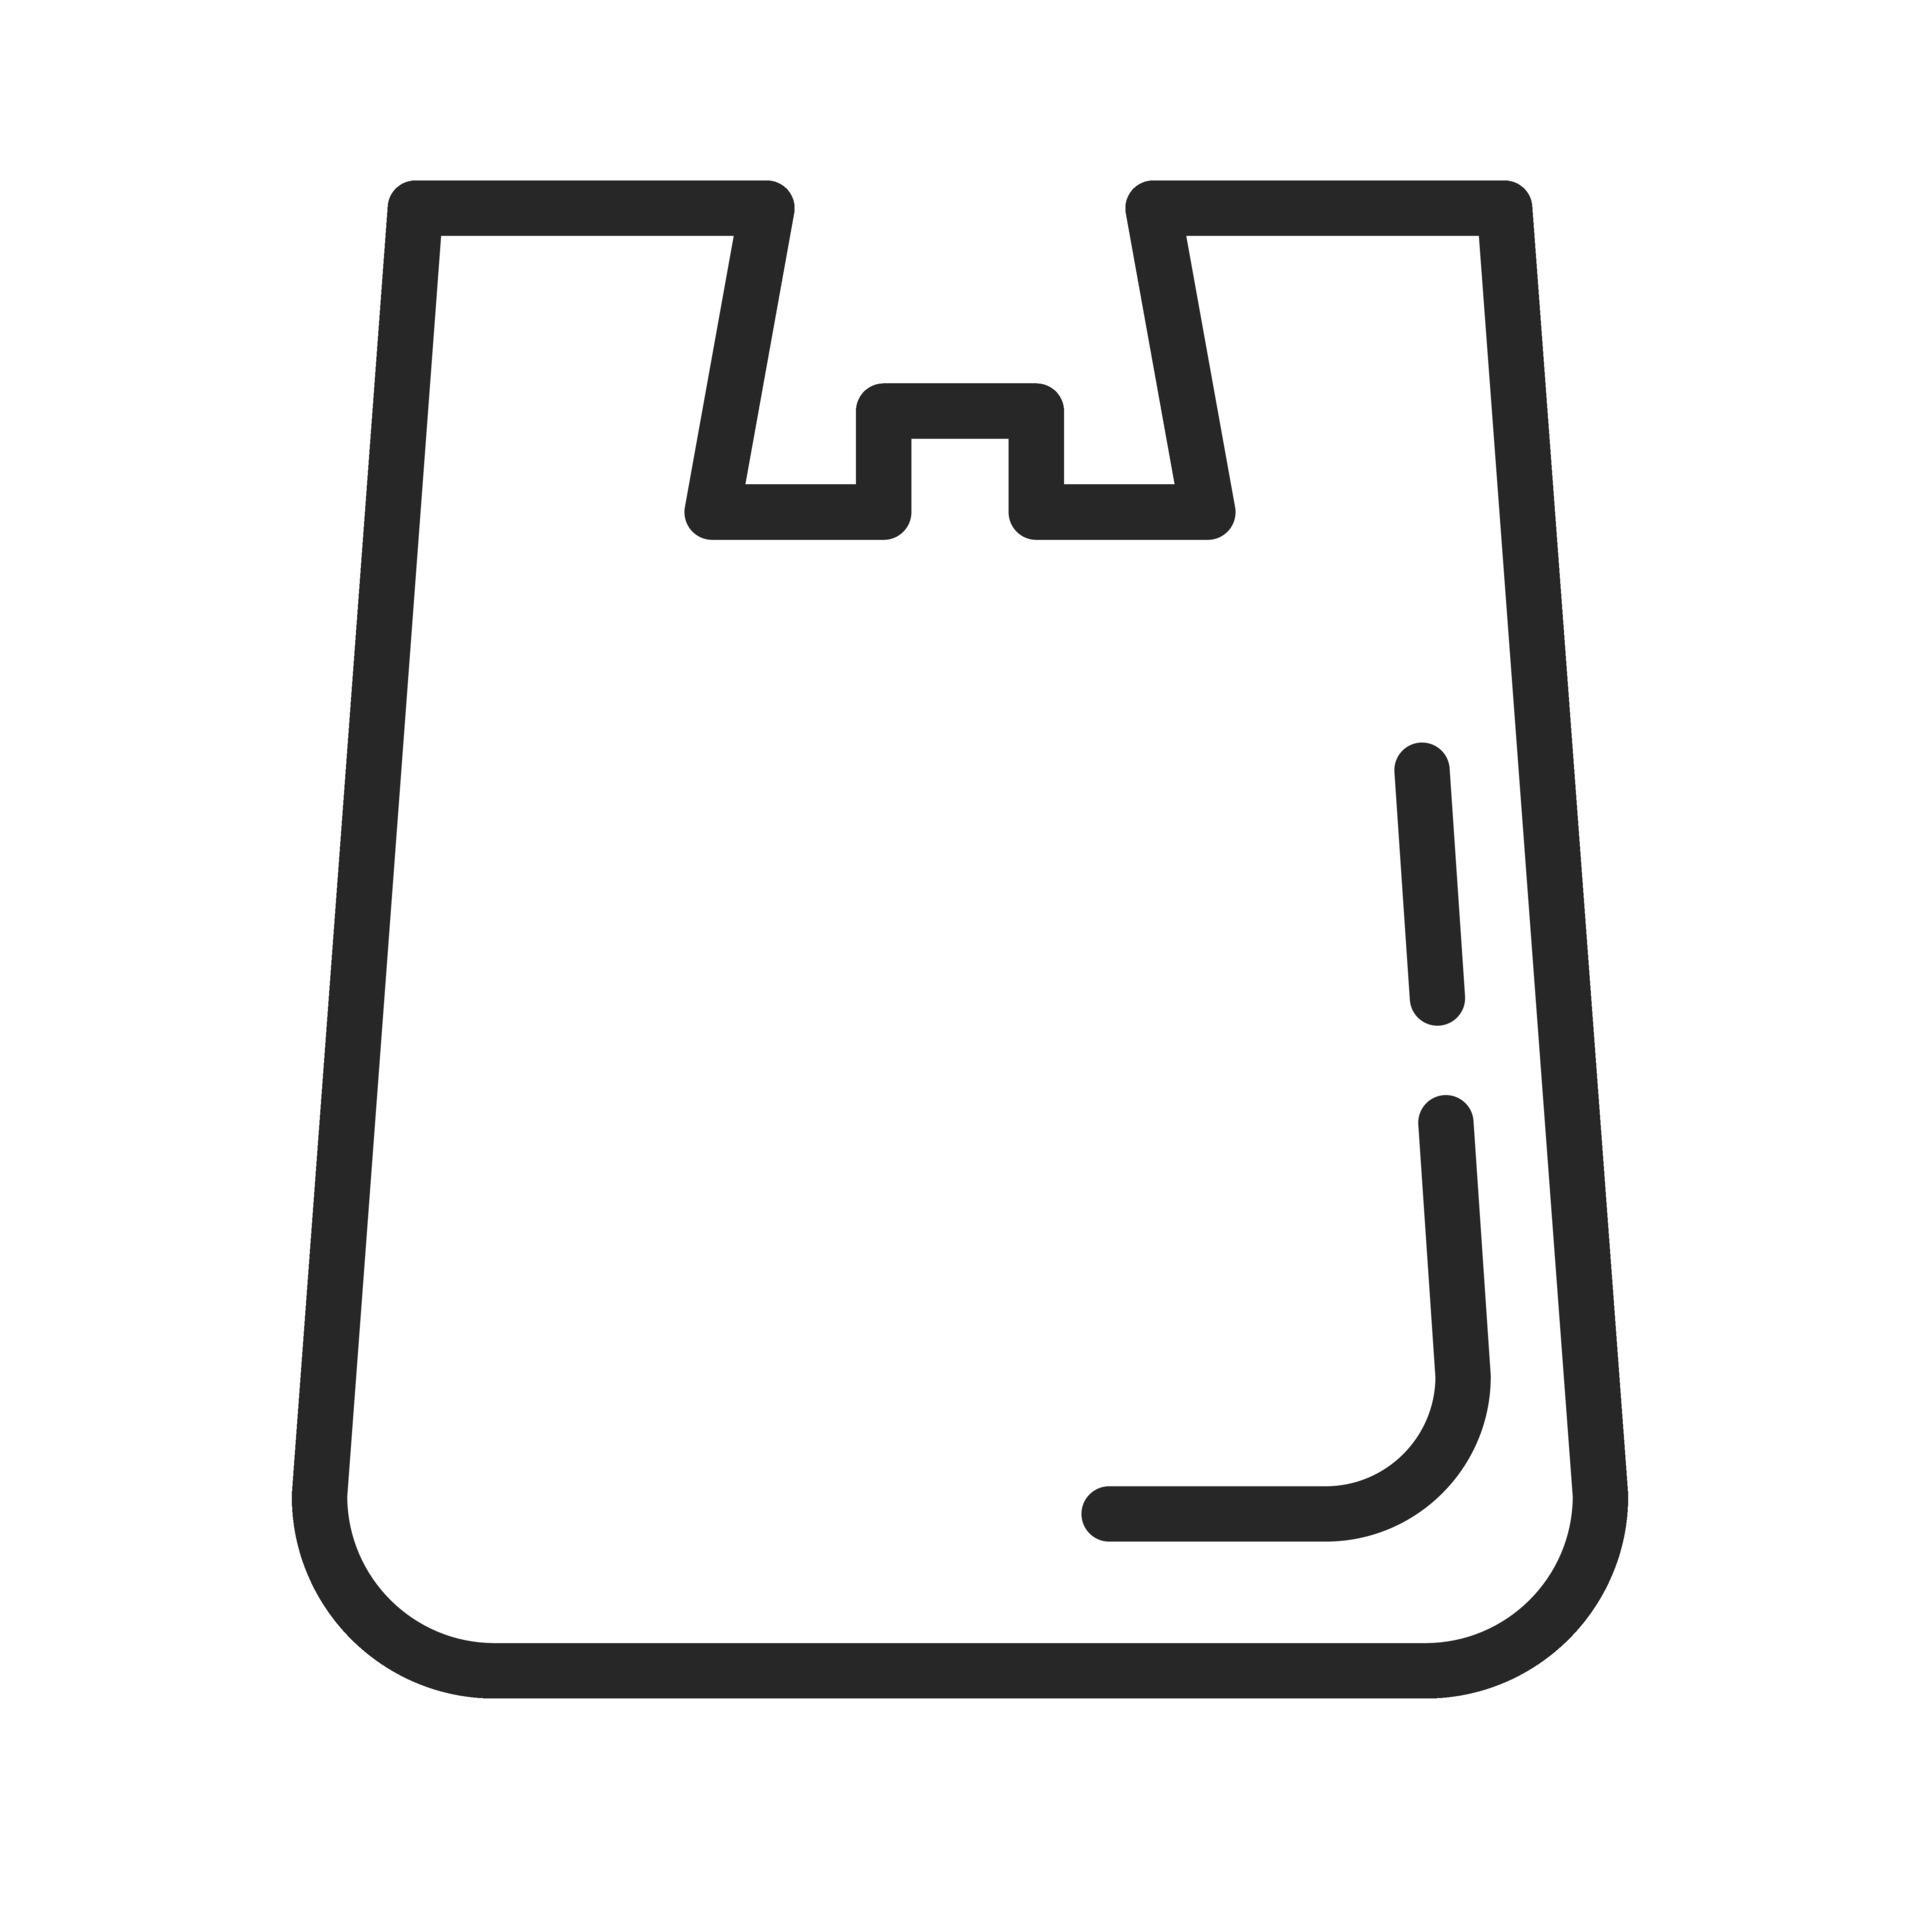 Plastic bag icon Images - Search Images on Everypixel